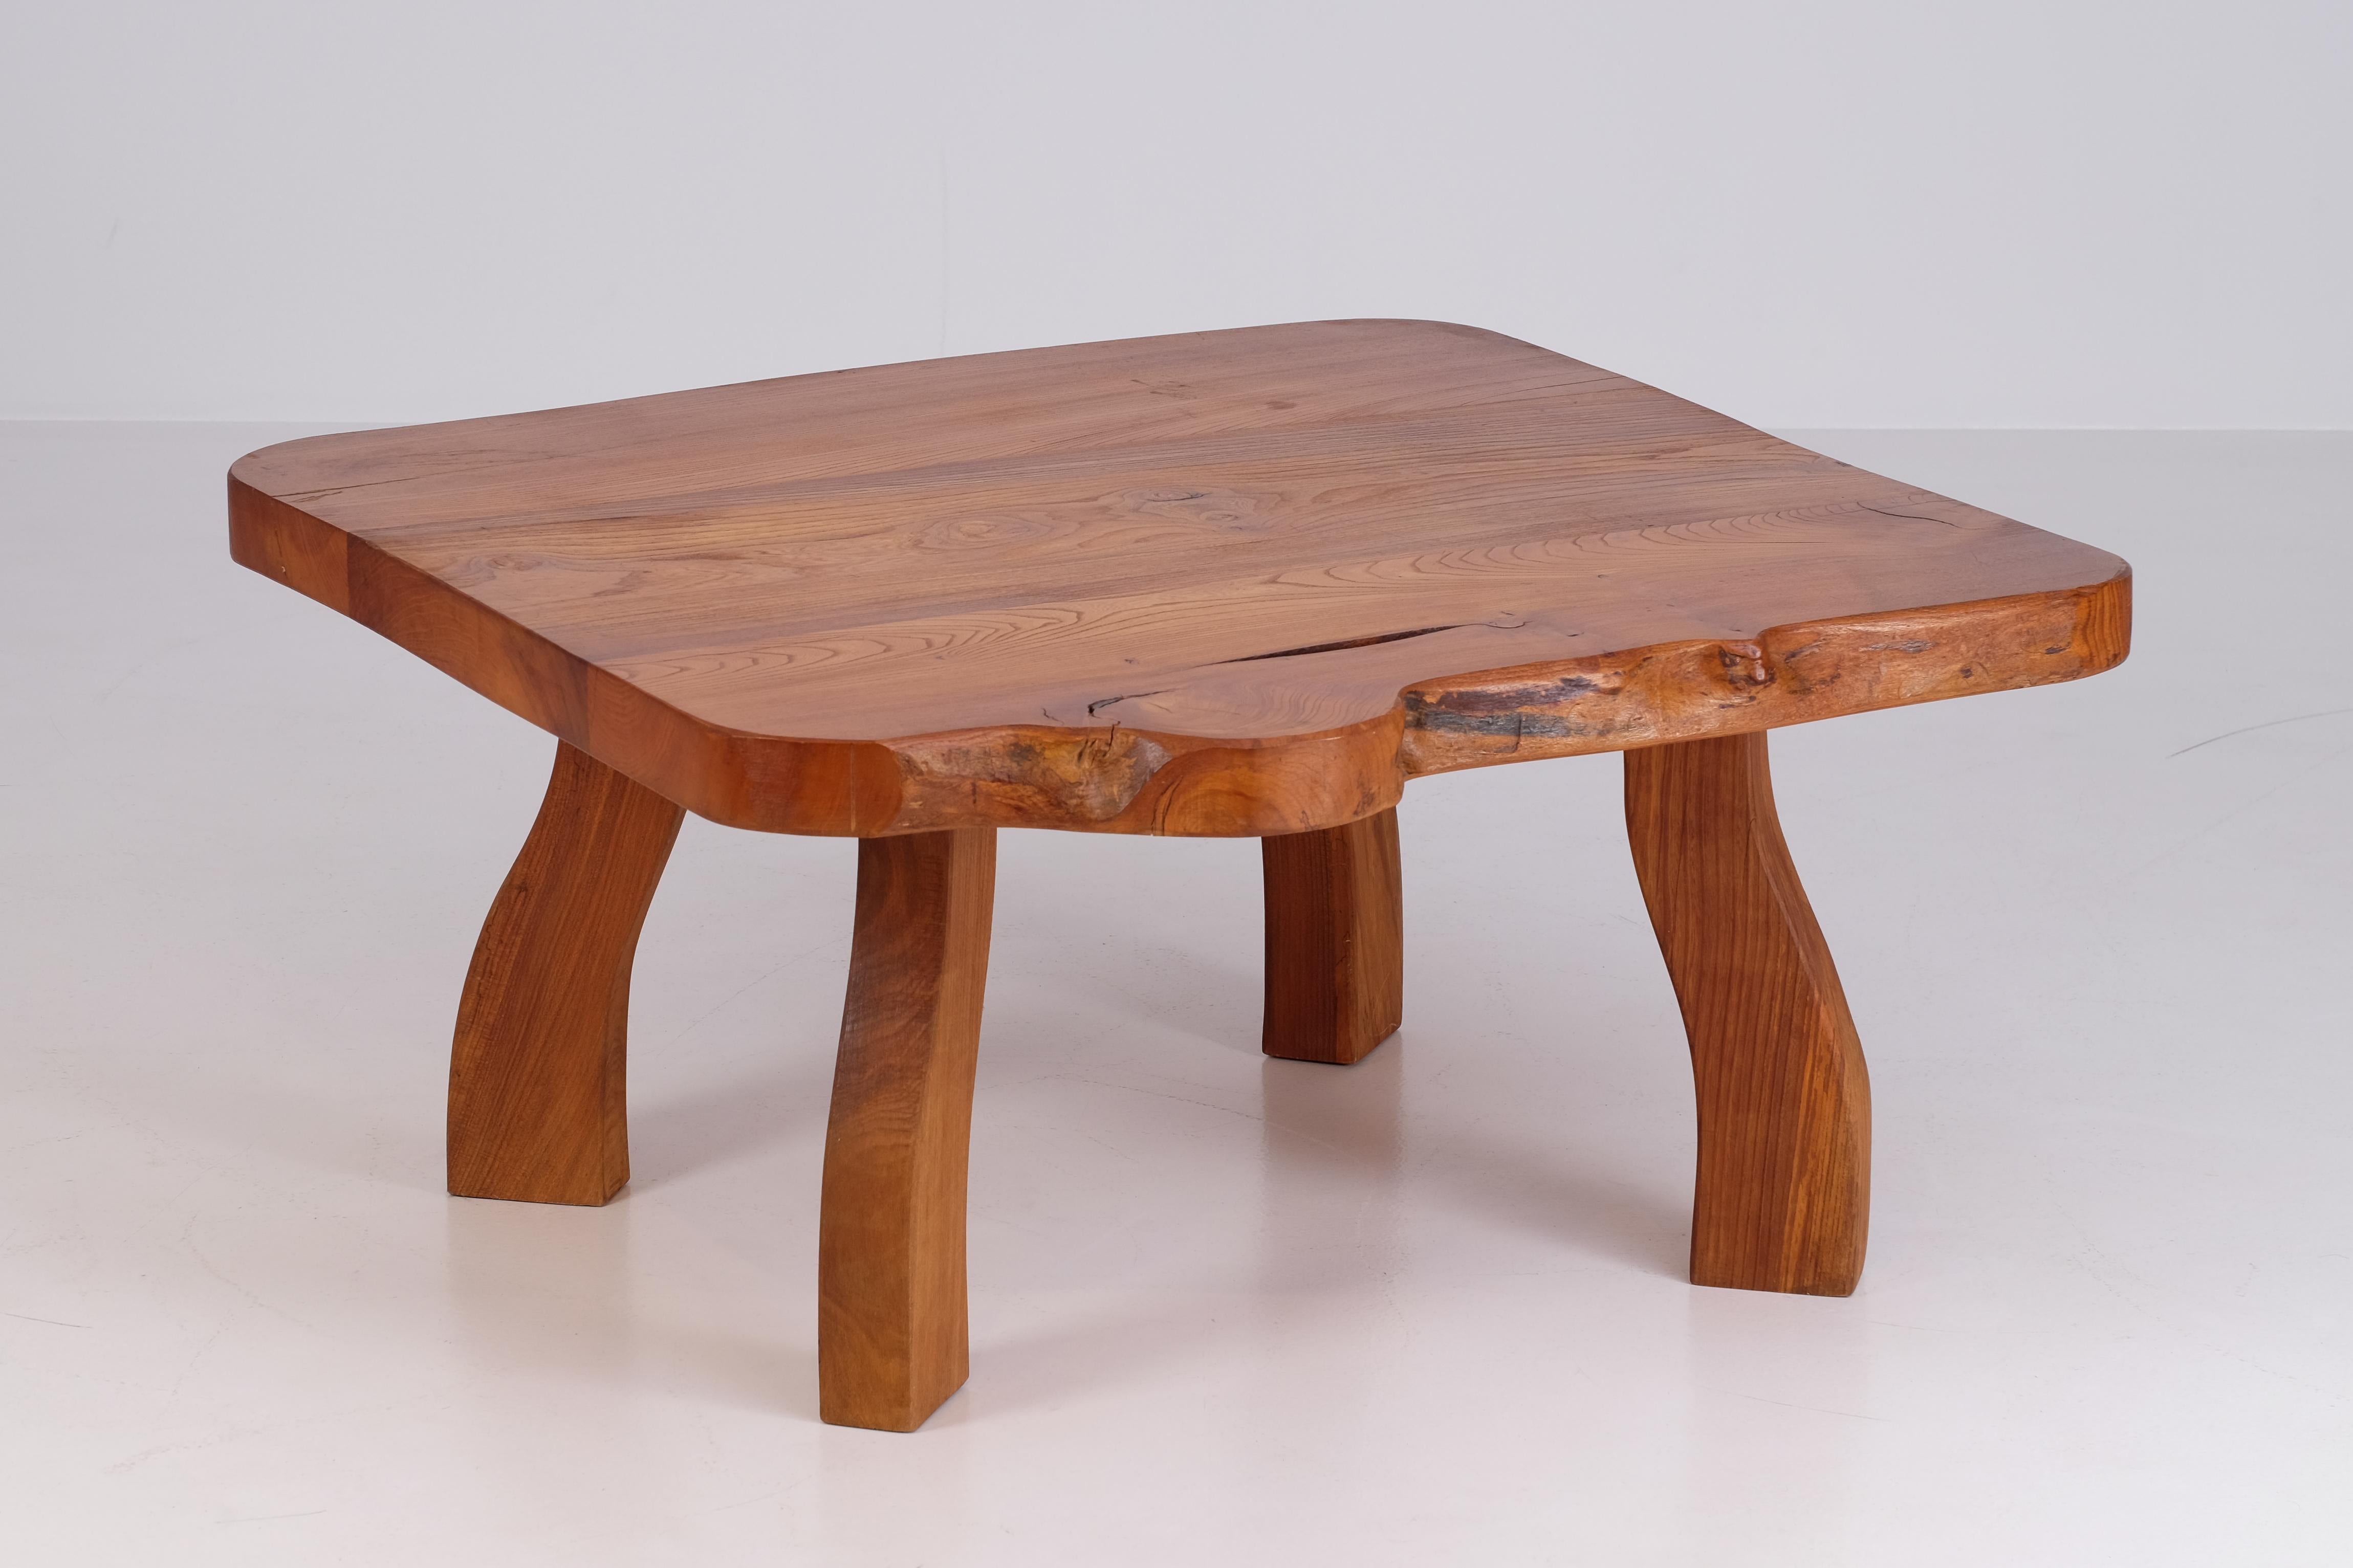 A lovely and rare naturalistic shaped coffee table / long bench / side table in elm. Produced by C. A. Beijbom, 1967, Sweden.